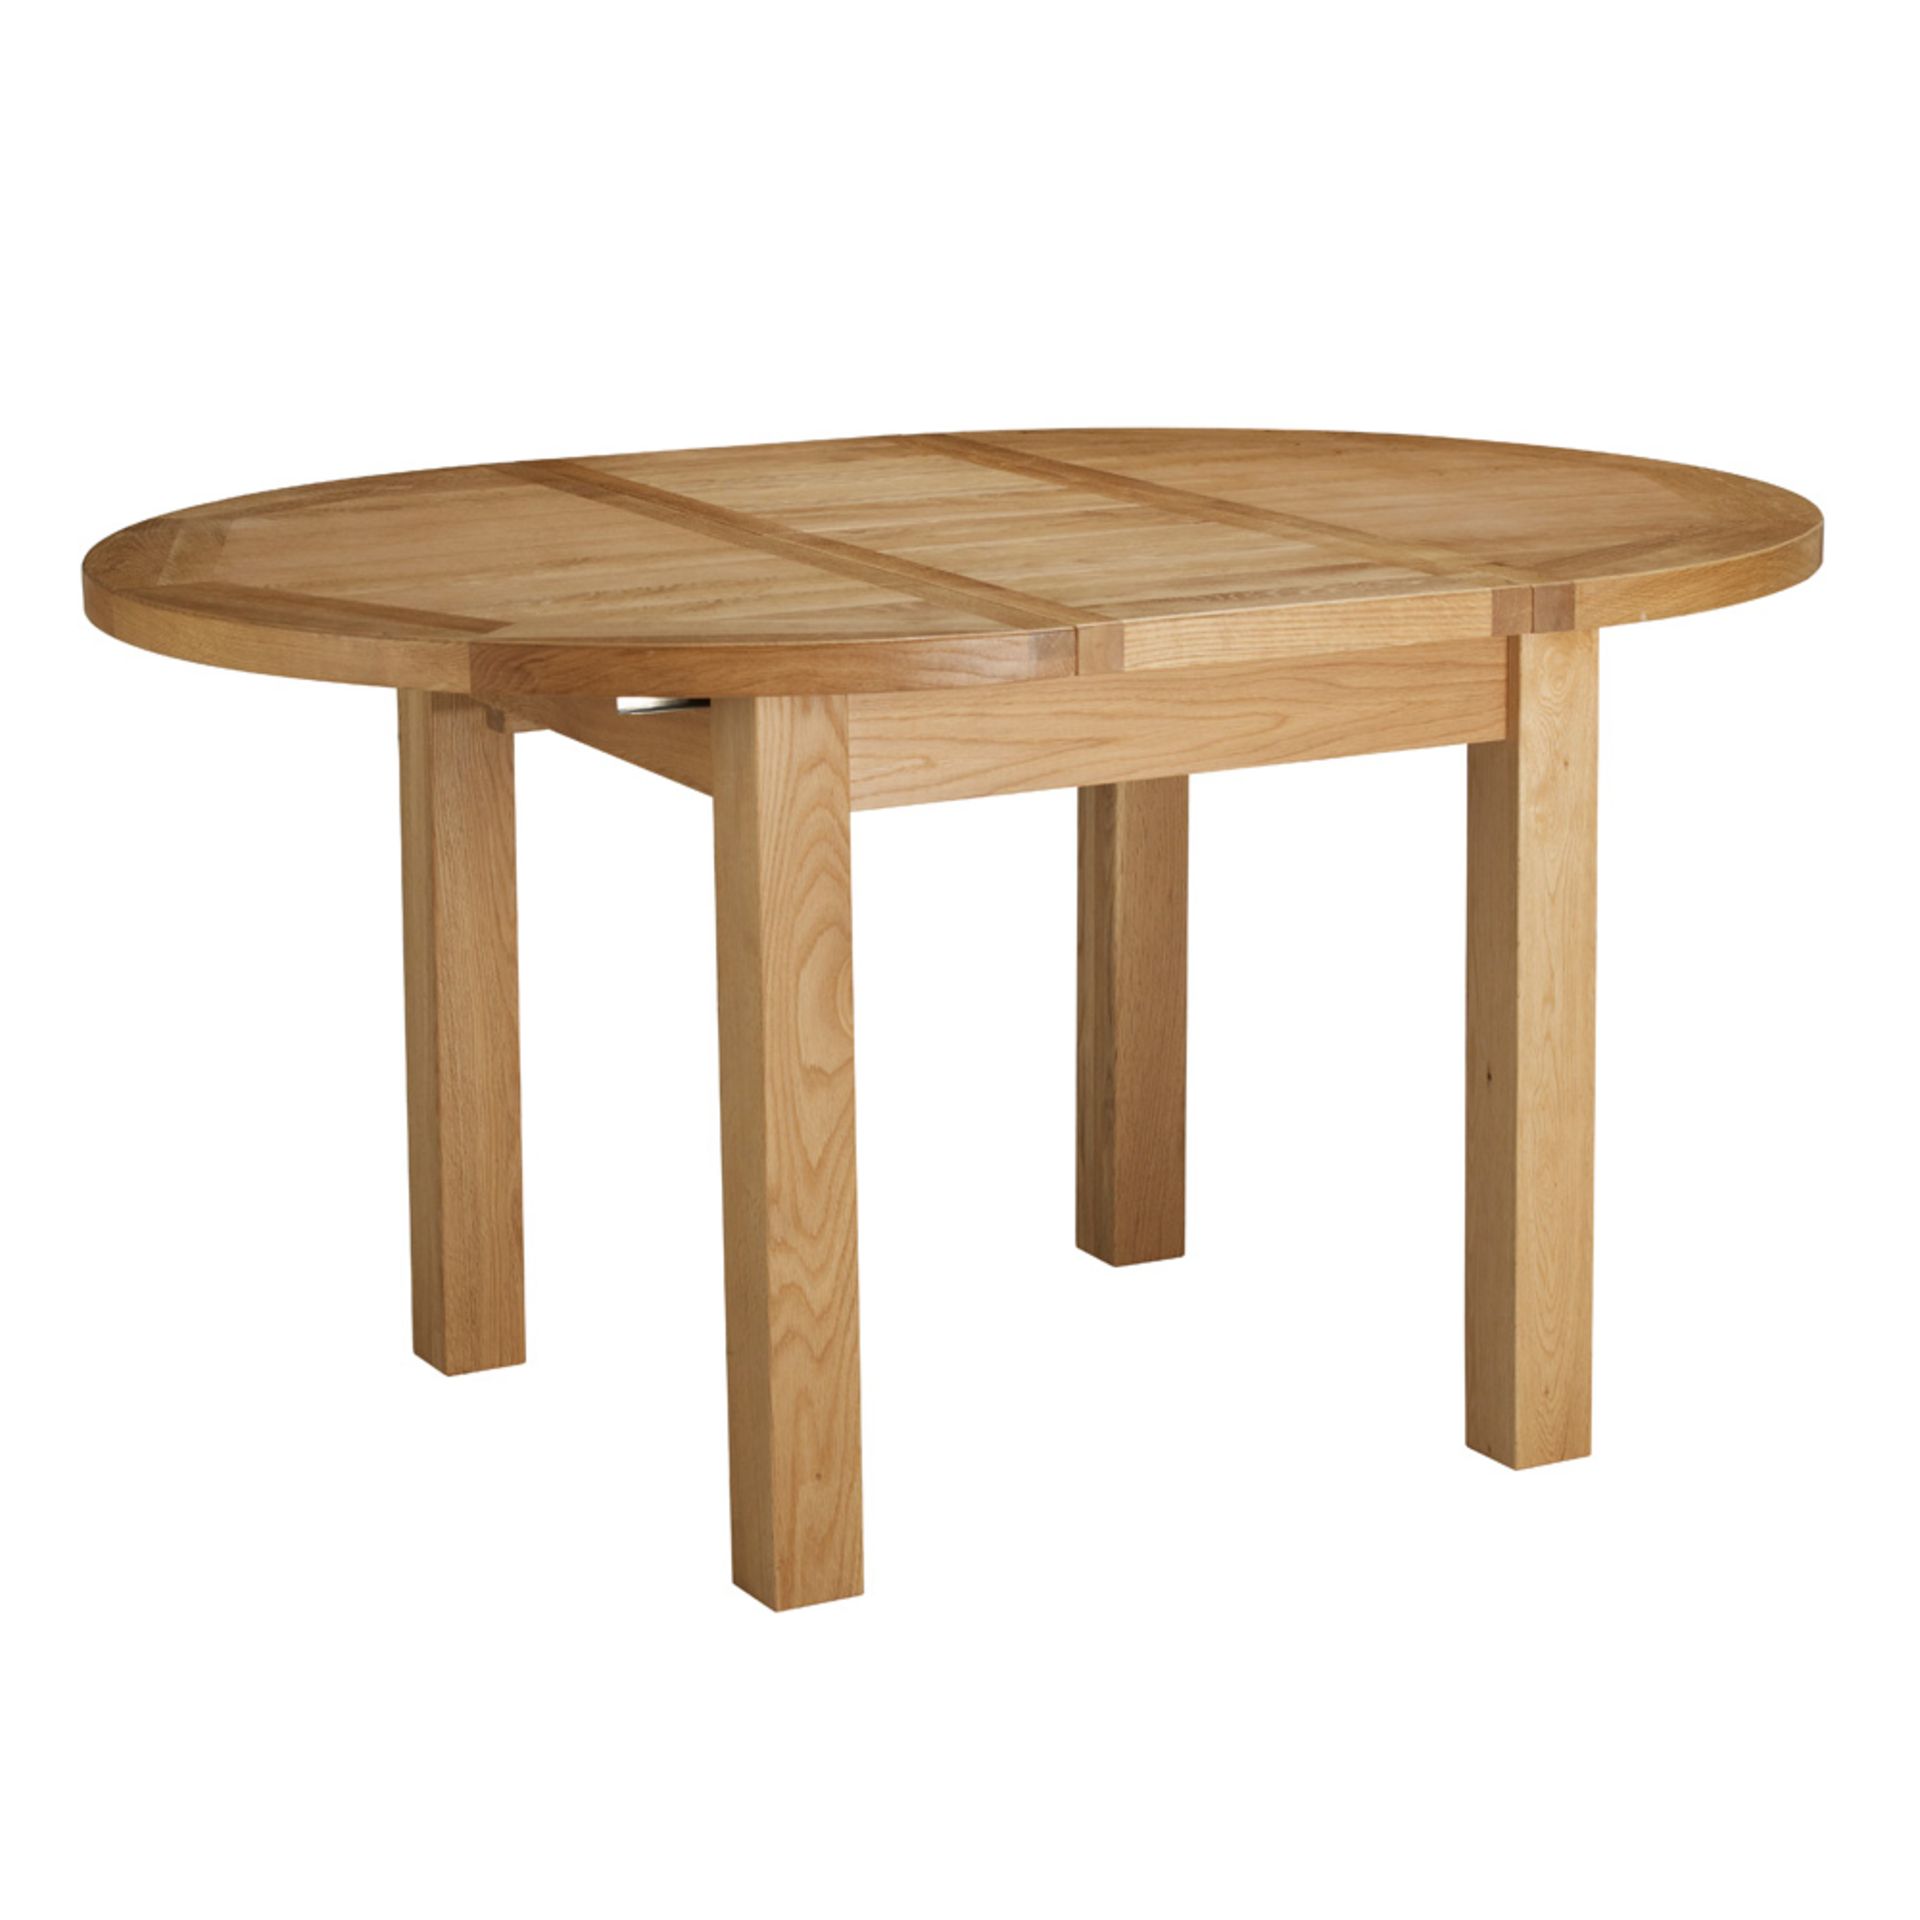 V Brand New Chiswick Oak 120 x 80 Butterfly Extension Table 120/166w x 80d x 77h cms ISP £405.99 (